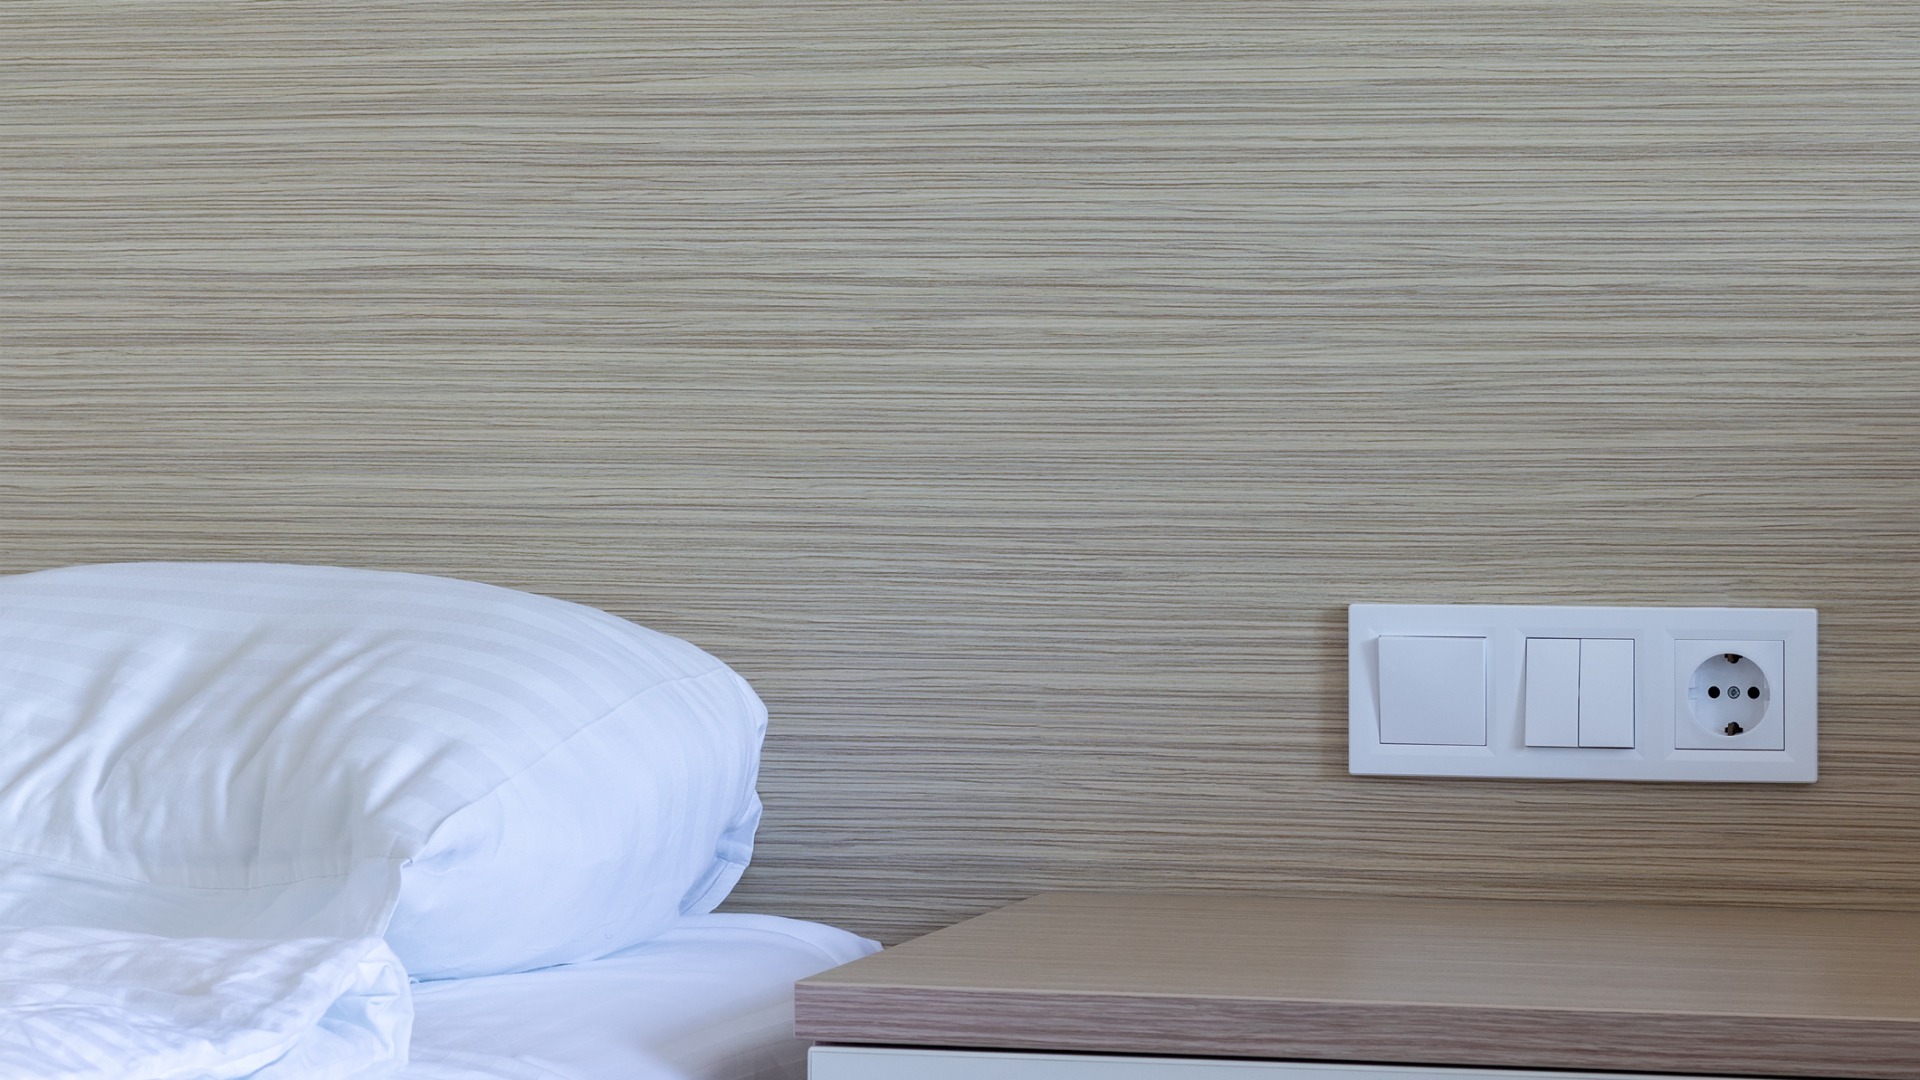 This is a close-up of the sleeping area in a hotel room. There are light switches and a power outlet right next to the pillow and above the bedside table. 